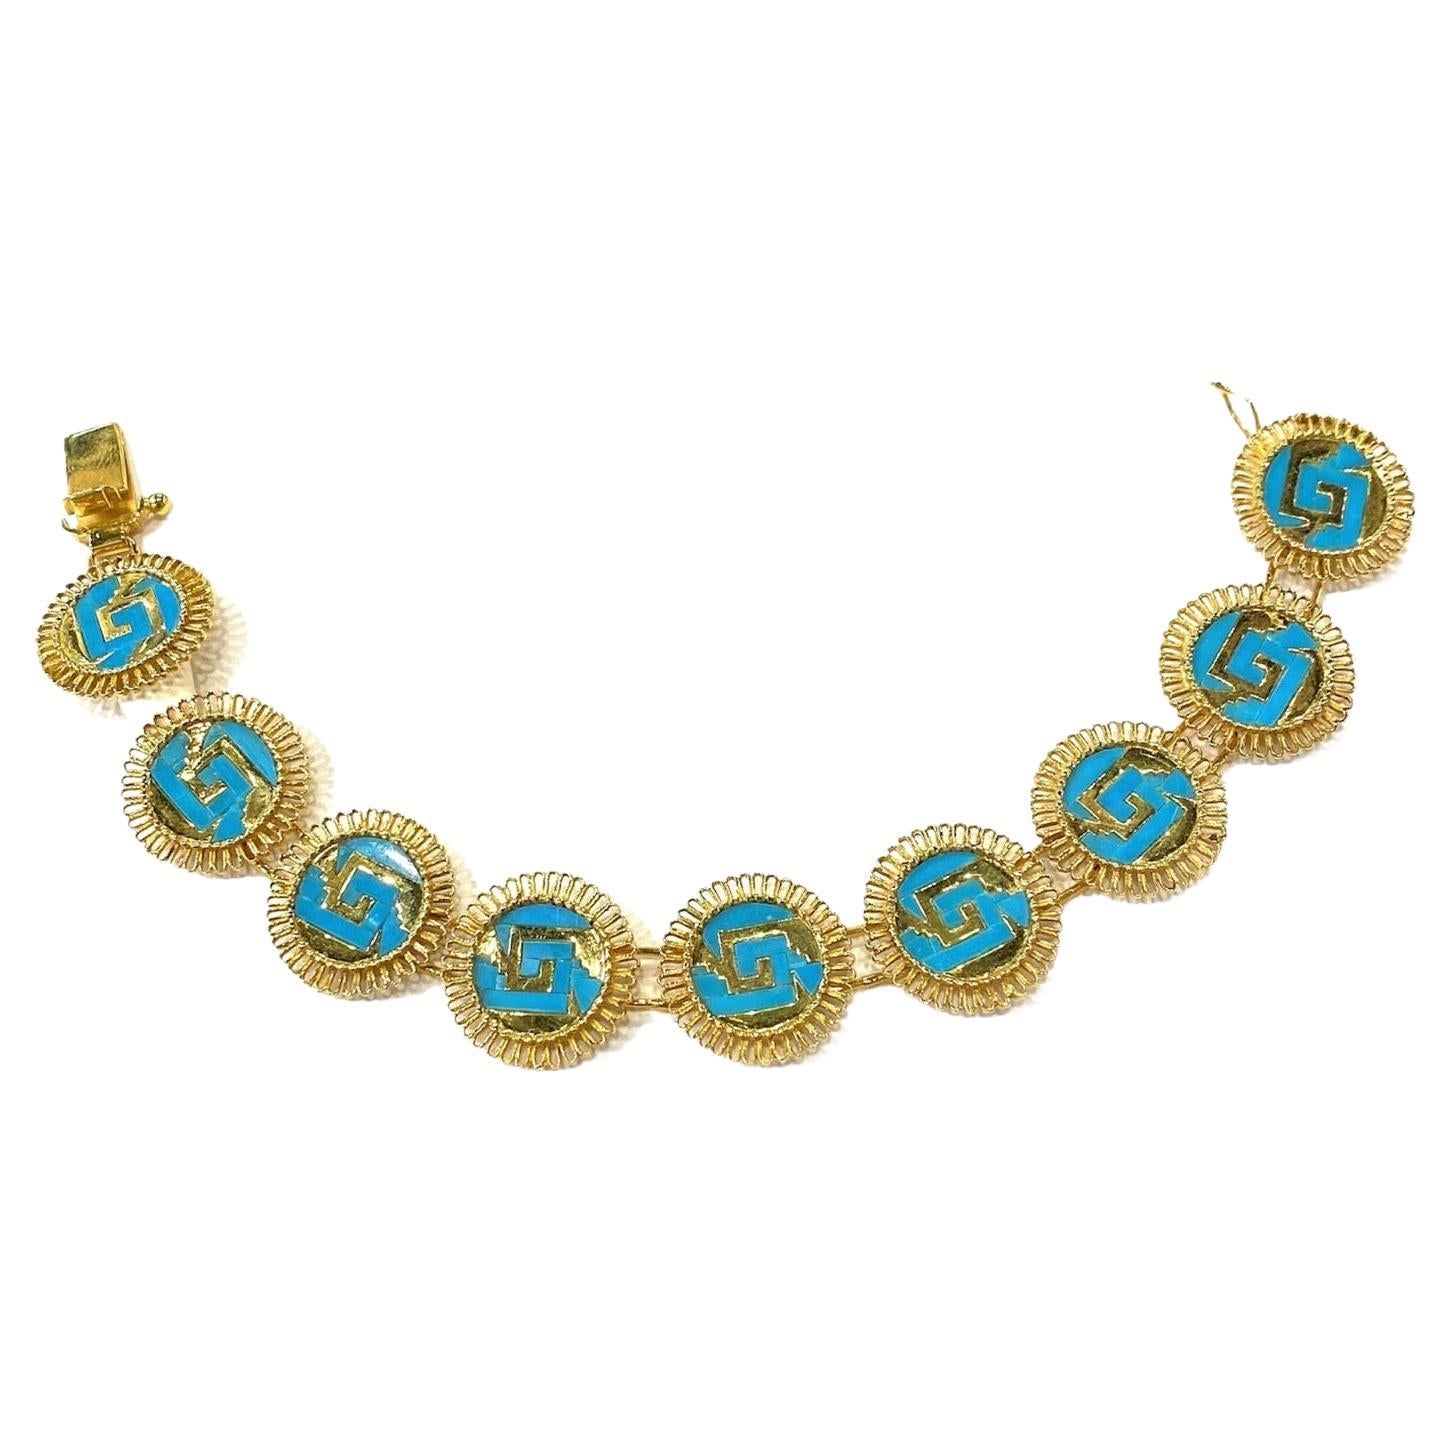 Oro de Monte Alban 14k Gold and Turquoise Bracelet. For Sale